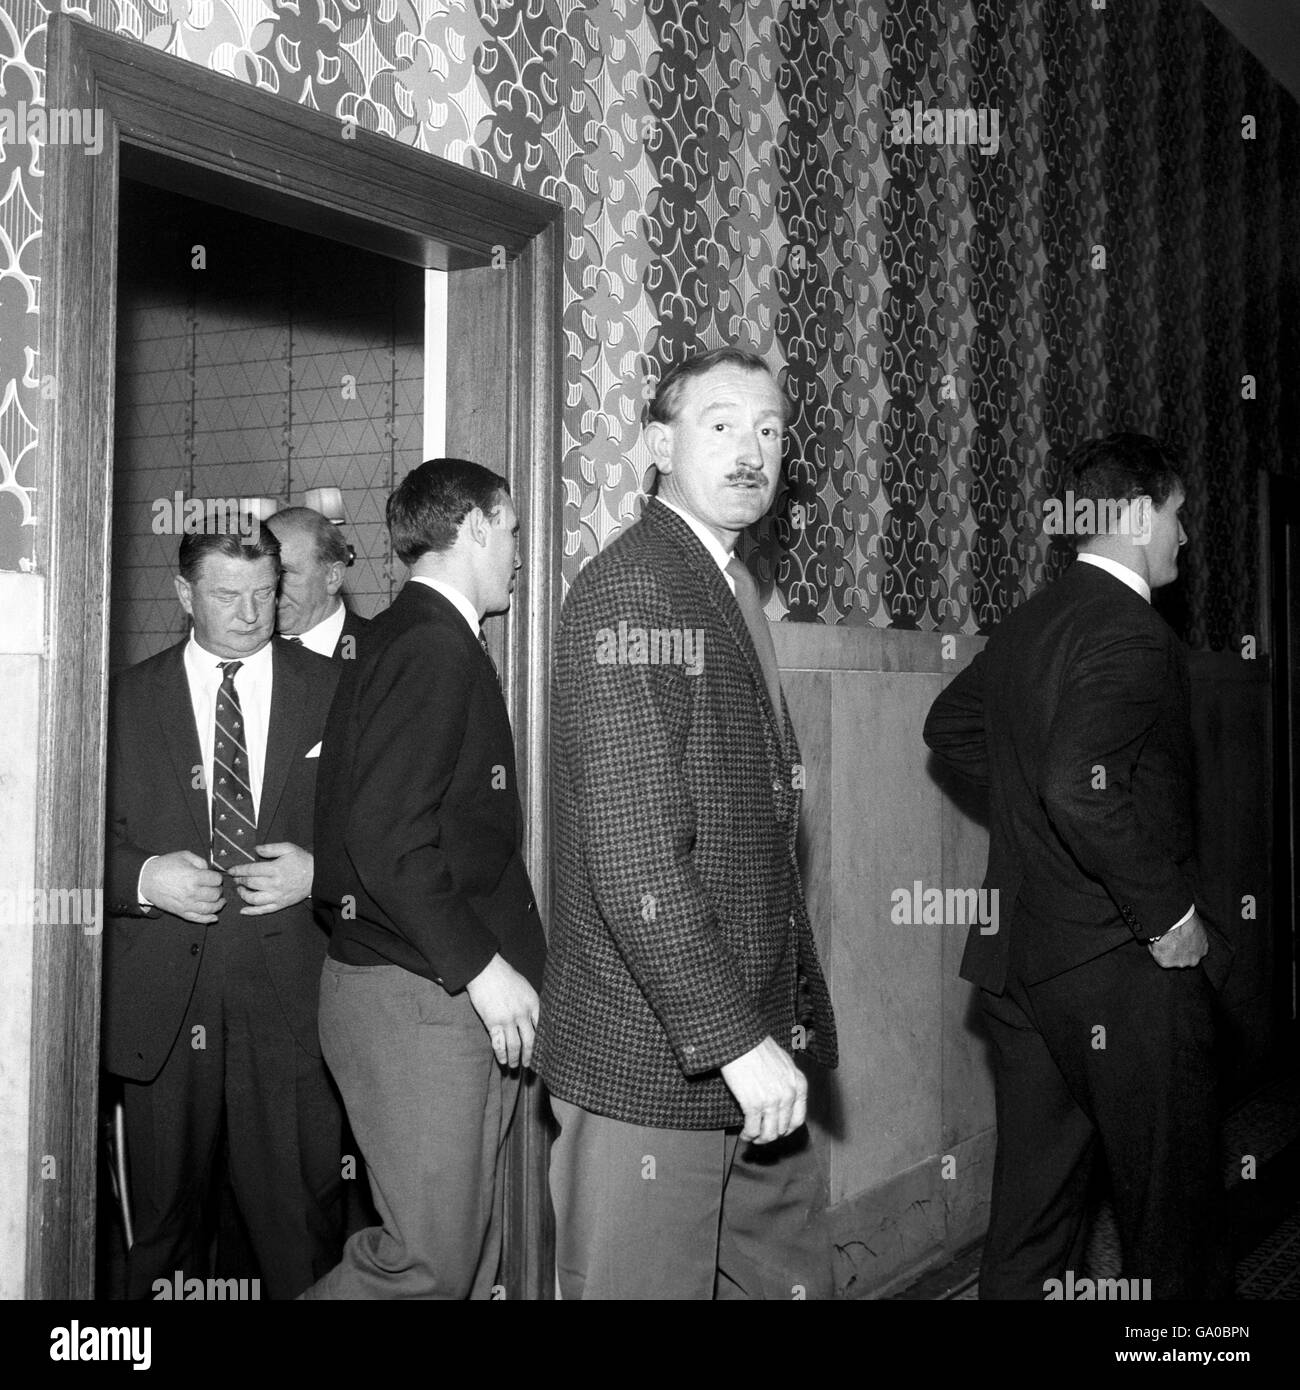 After his seven day suspension, Manchester United's Pat Crerand turns away from the camera as he leaves his personal hearing before the F.A Disciplinary Committee in Manchester Stock Photo